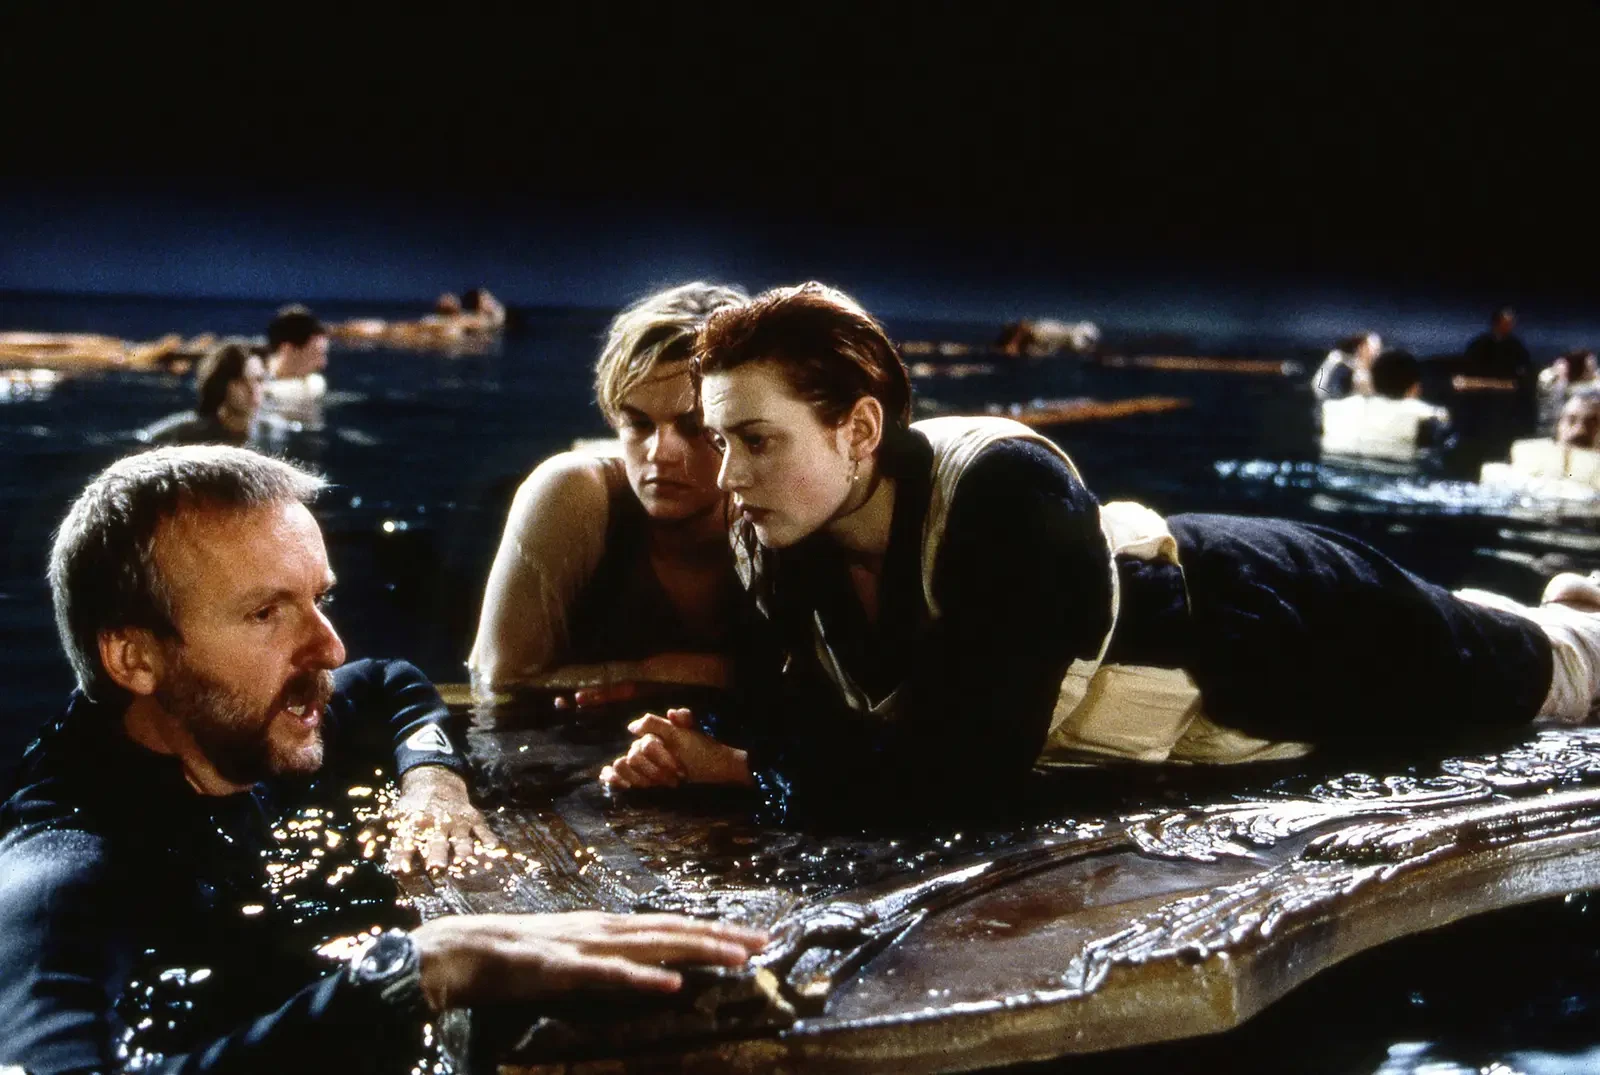 James Cameron advising his lead actors on the set of Titanic